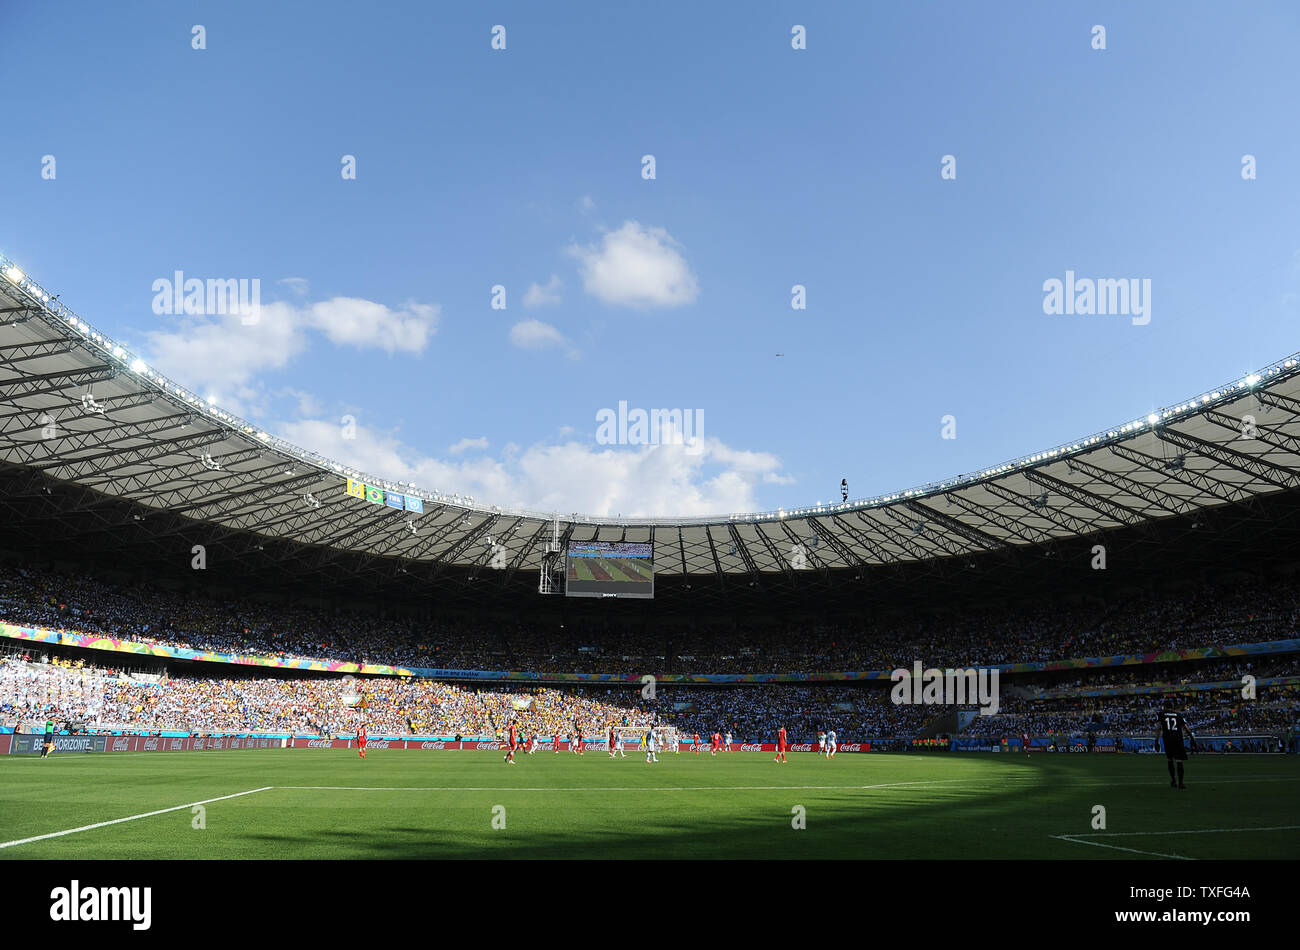 A general view of the stadium during the 2014 FIFA World Cup Group F match at the Estadio Mineirao in Belo Horizonte, Brazil on June 21, 2014. UPI/Chris Brunskill Stock Photo